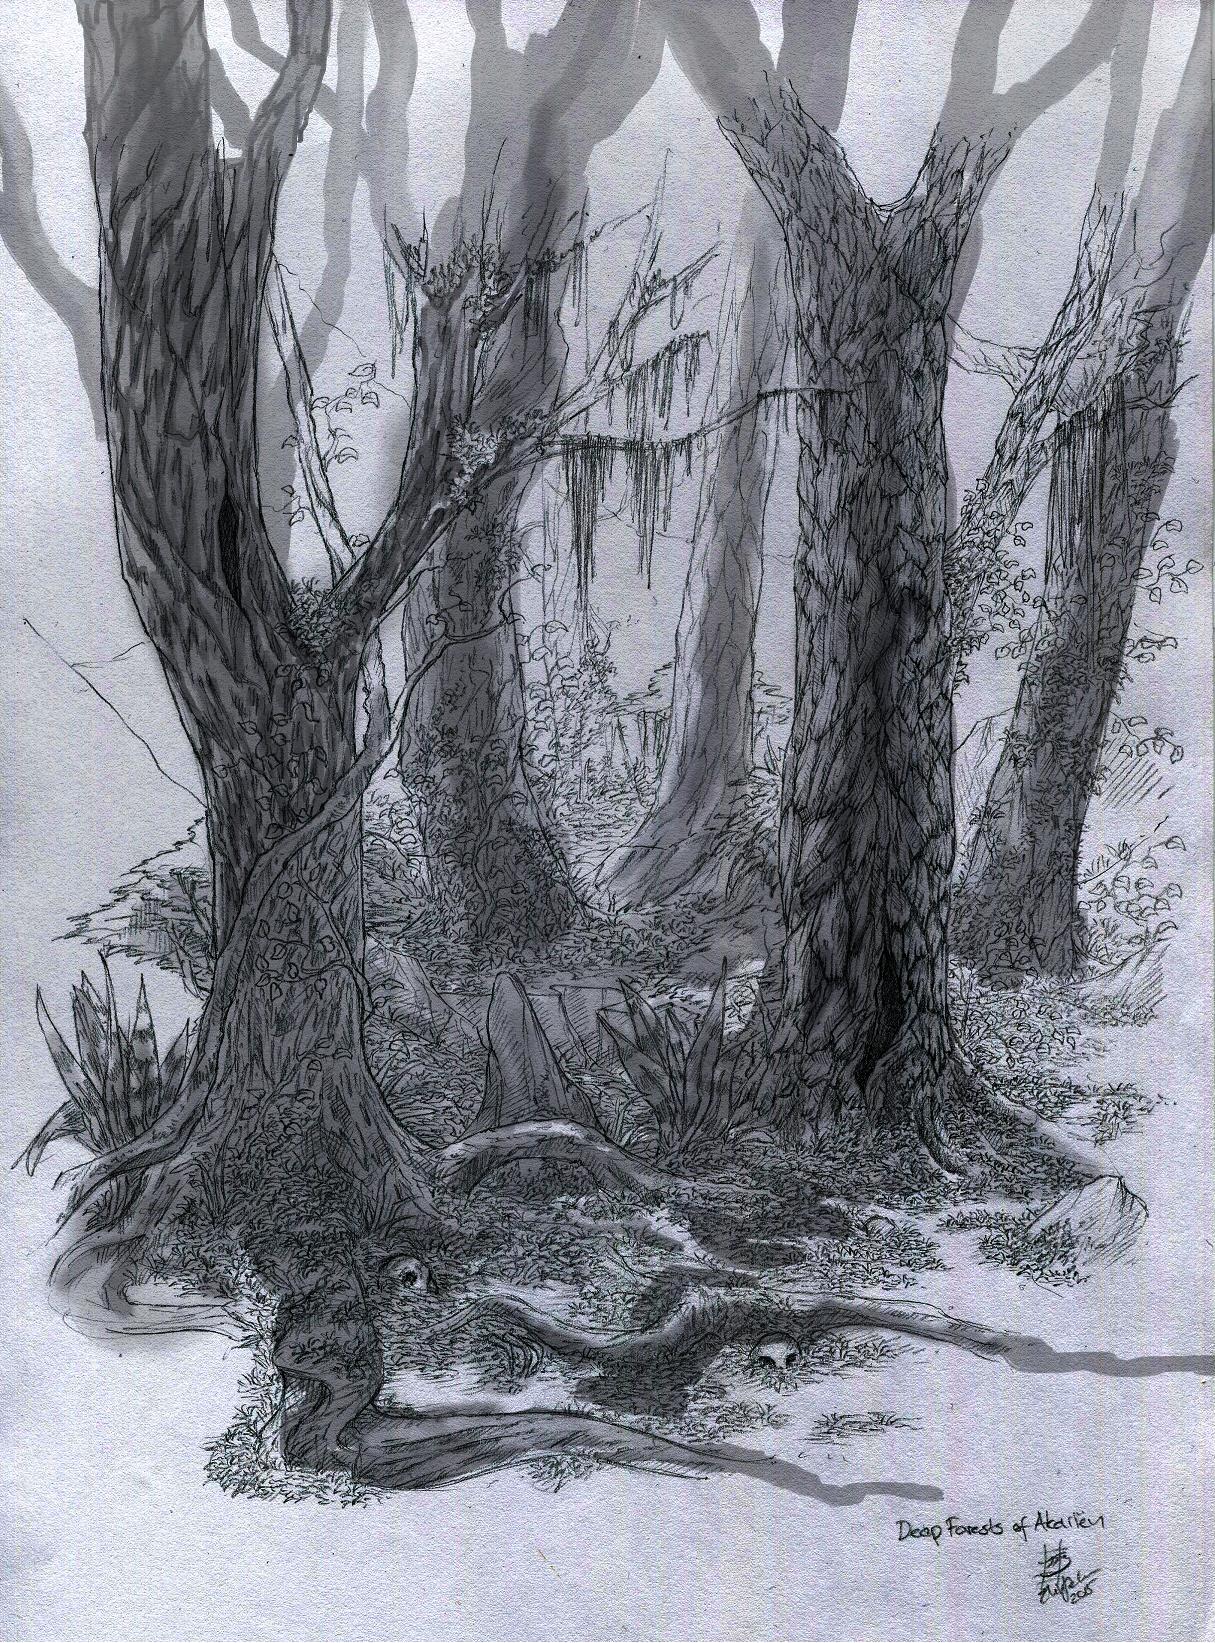 Concept art of a forest